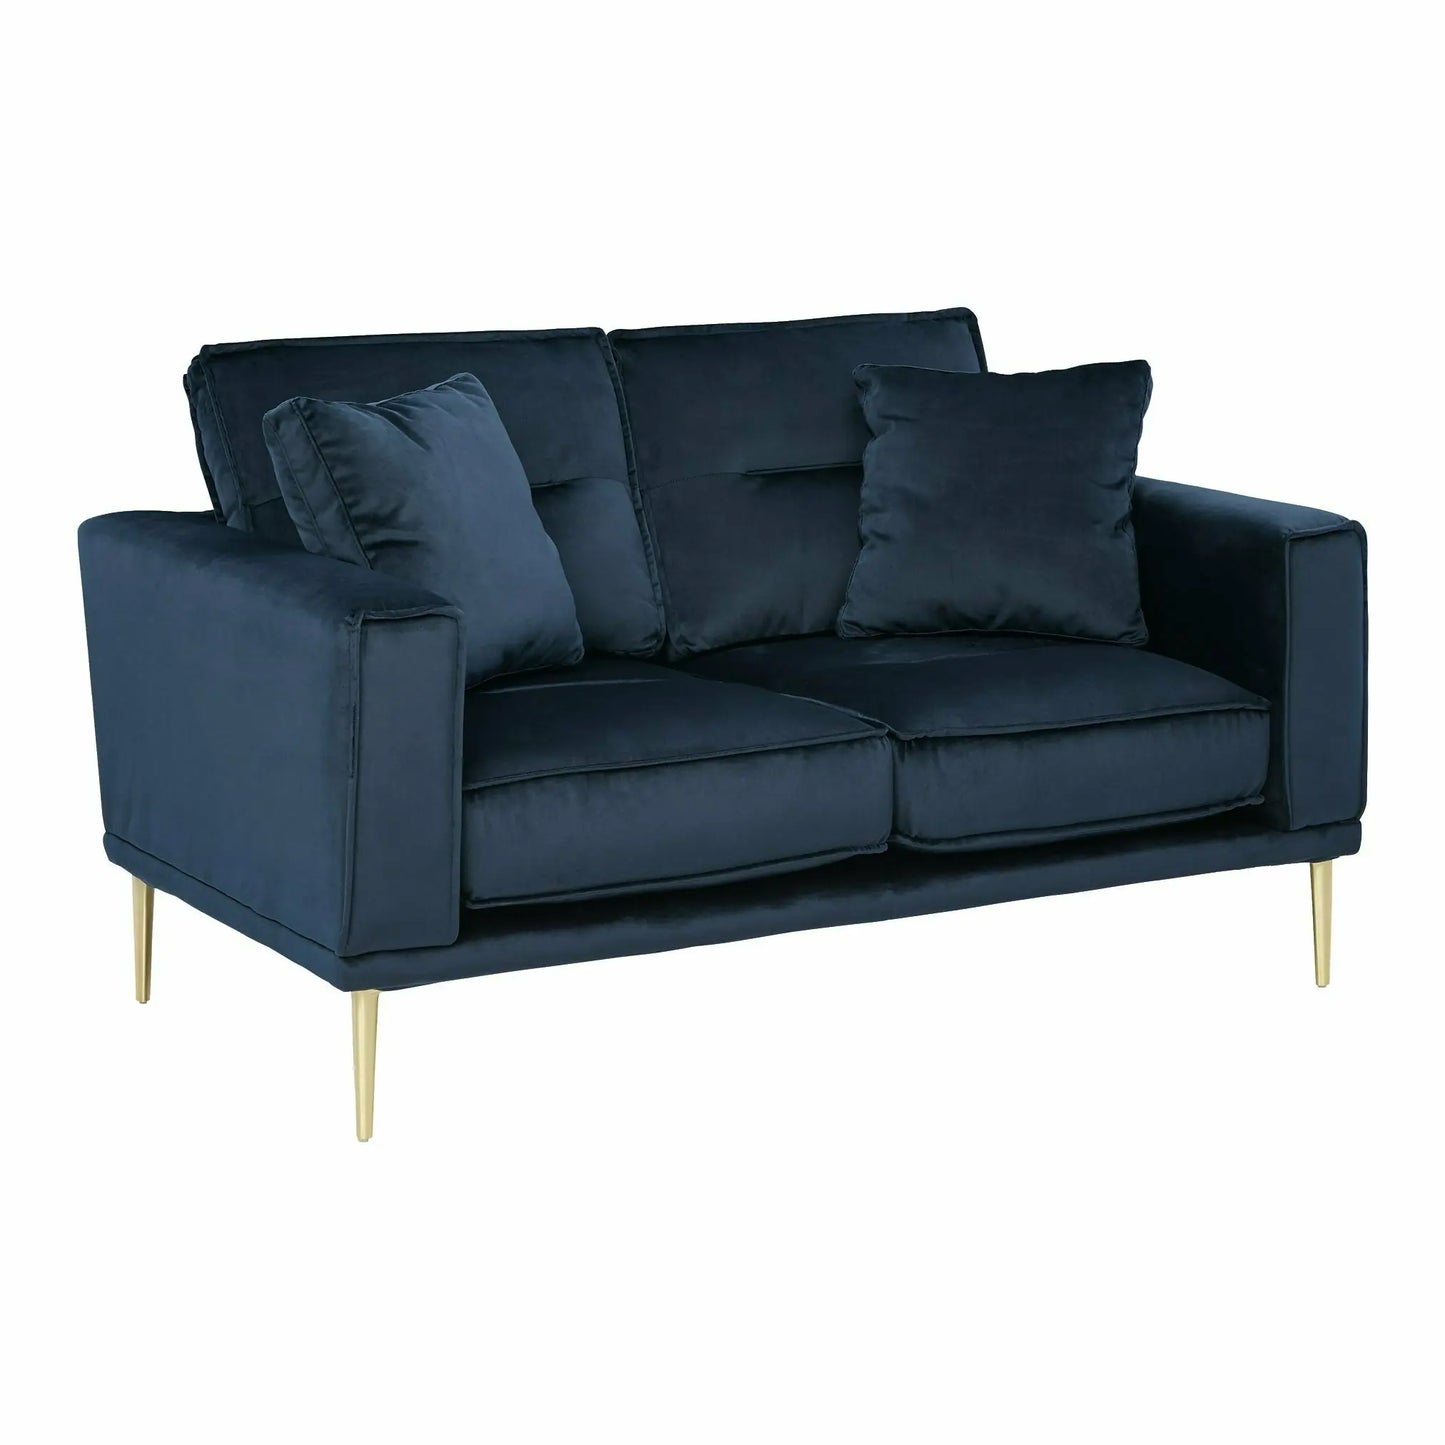 Macleary Sofa, Loveseat and Chair Ashley Furniture HomeStore